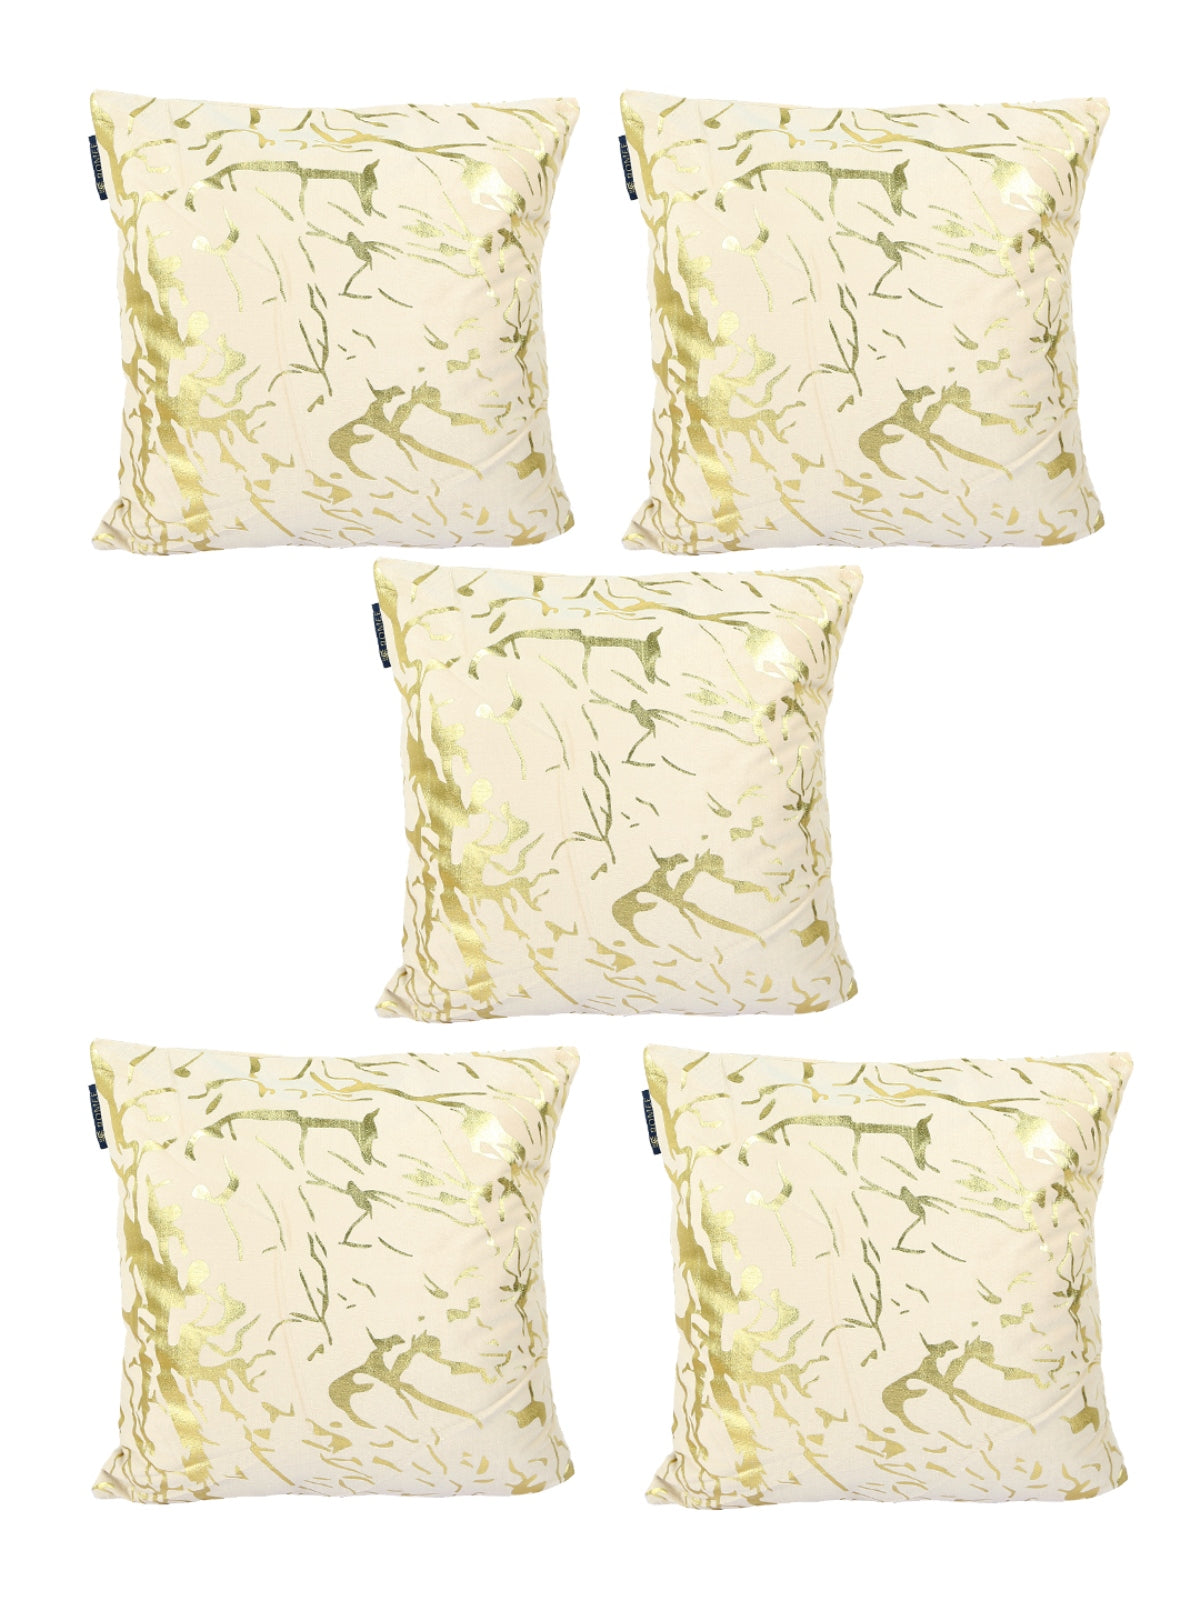 Cream Set of 5 Polyester 16 Inch x 16 Inch Cushion Covers